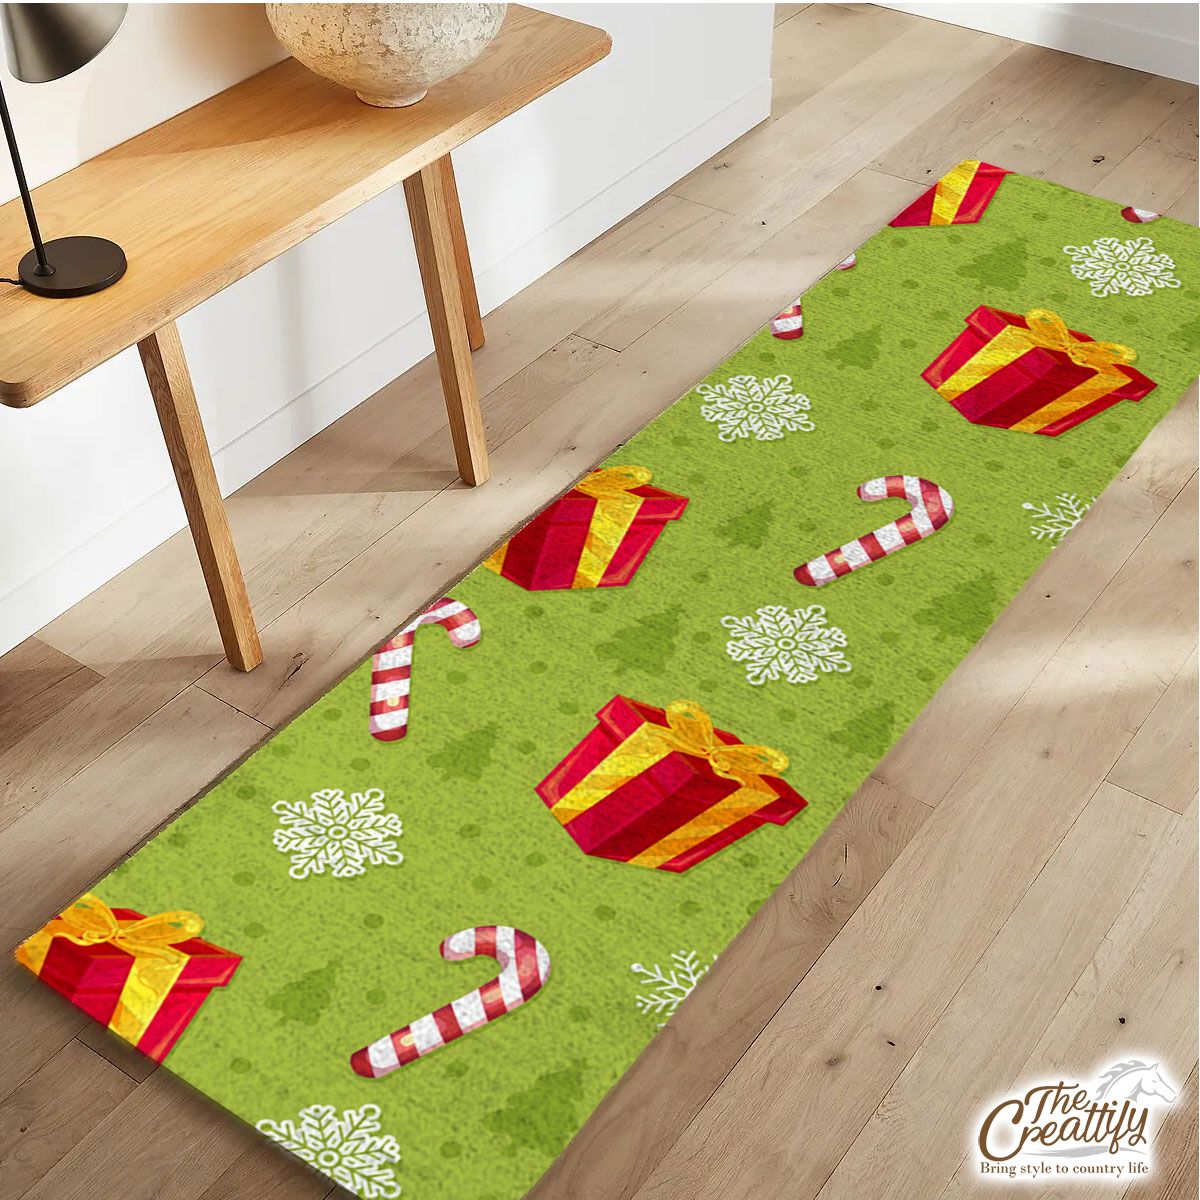 Red And Green Christmas Gift, Candy Cane, Snowflake Runner Carpet